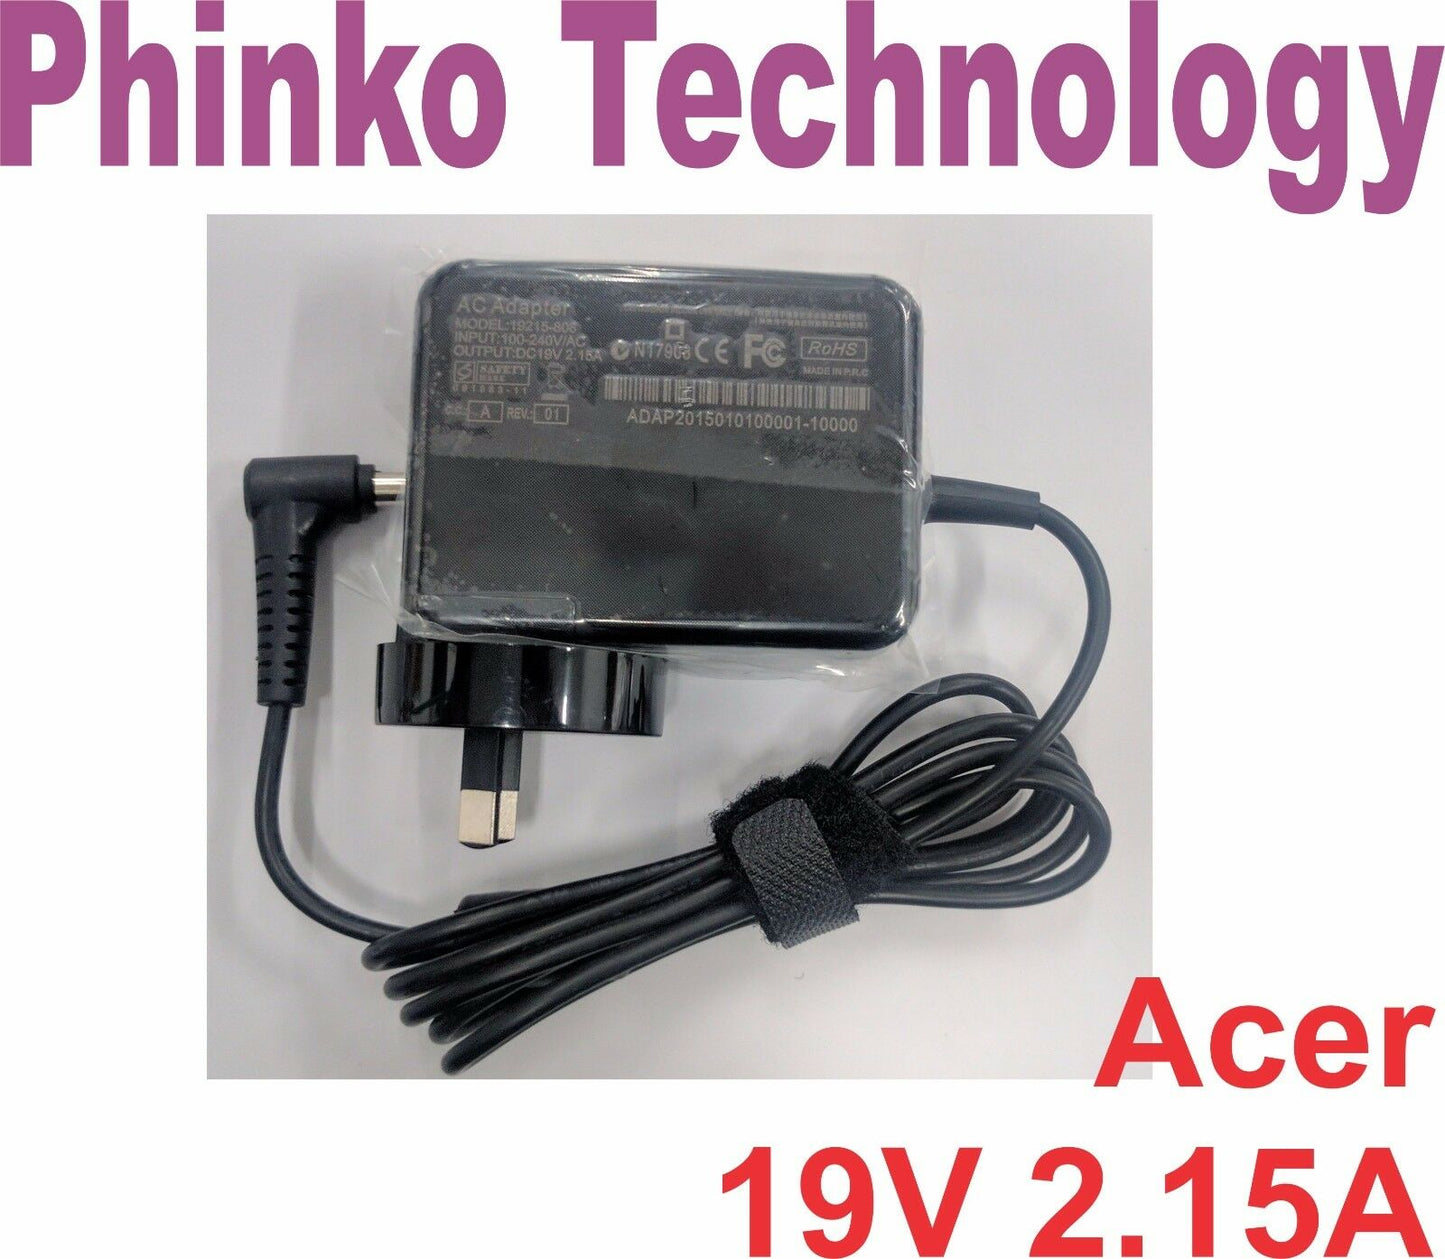 Acer Aspire 40w POWER AC Adapter 19V-2.15A DC:5.5mm*1.7mm (wall mount)